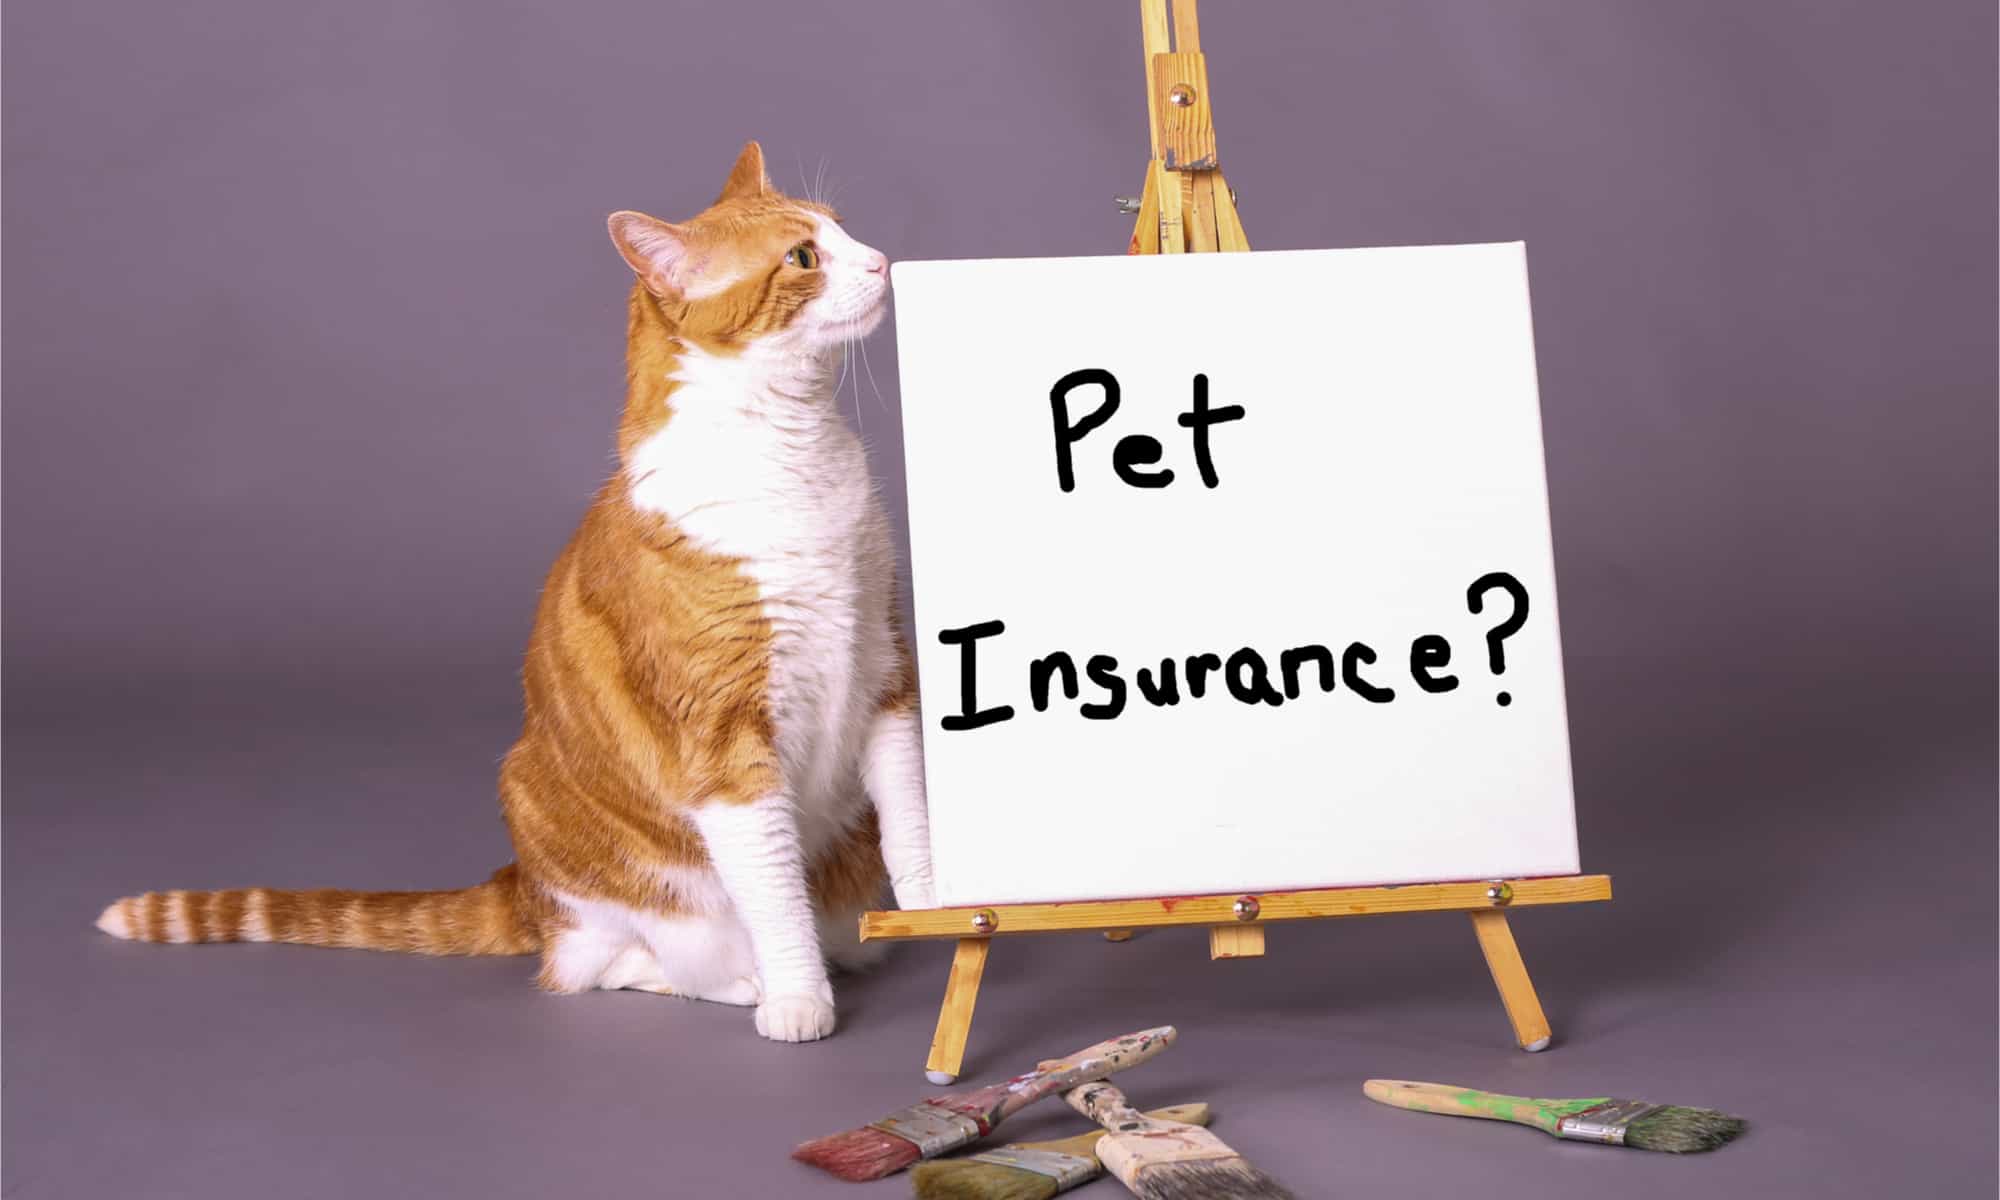 Cat sitting next to an easel with "Pet insurance?" written on it